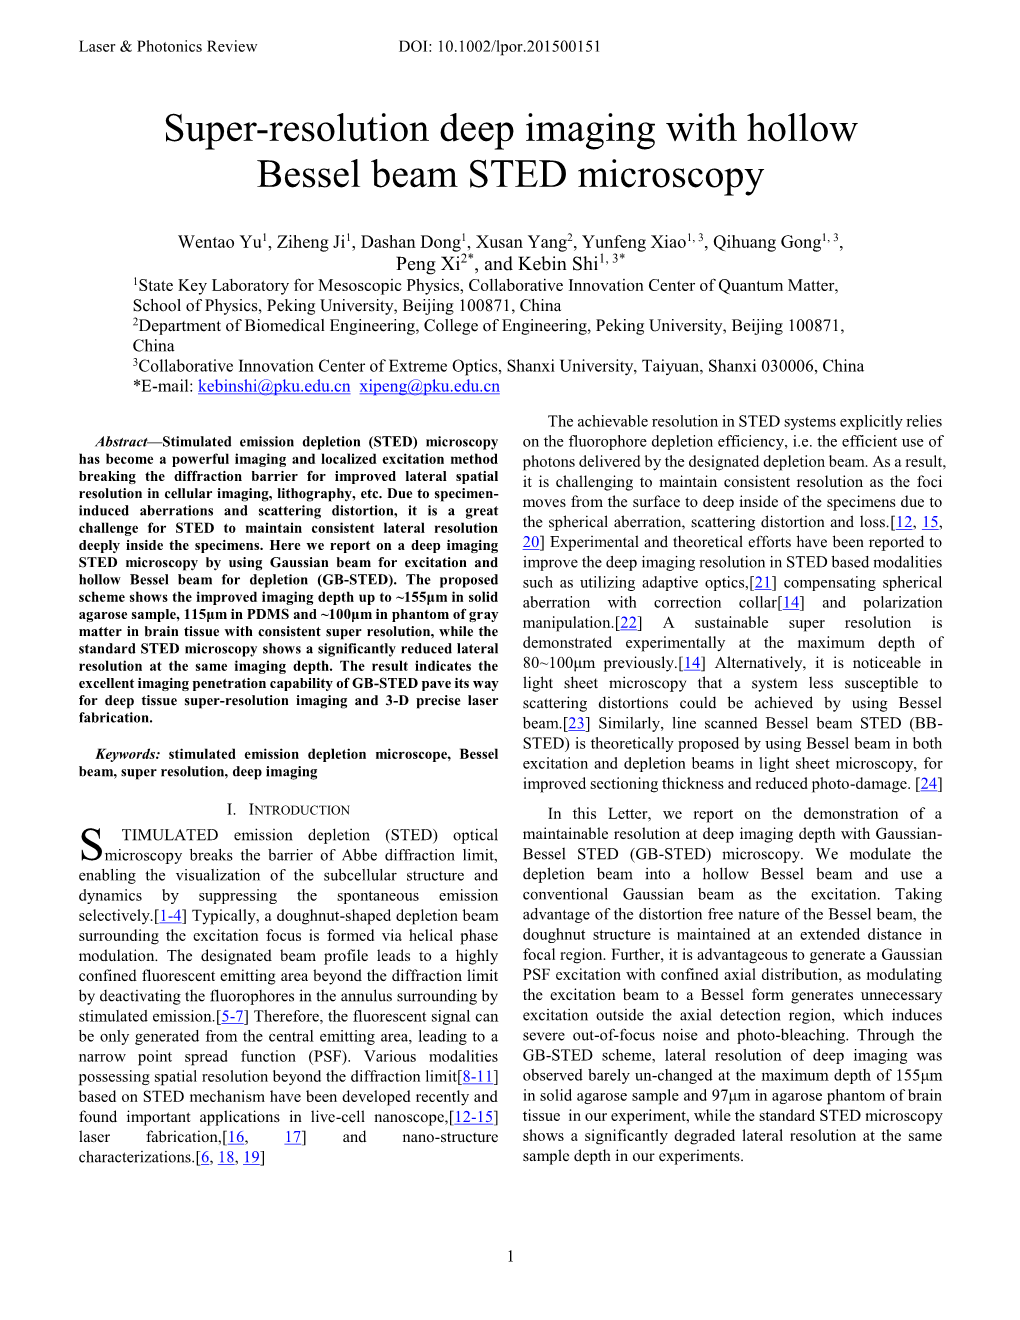 Super-Resolution Deep Imaging with Hollow Bessel Beam STED Microscopy